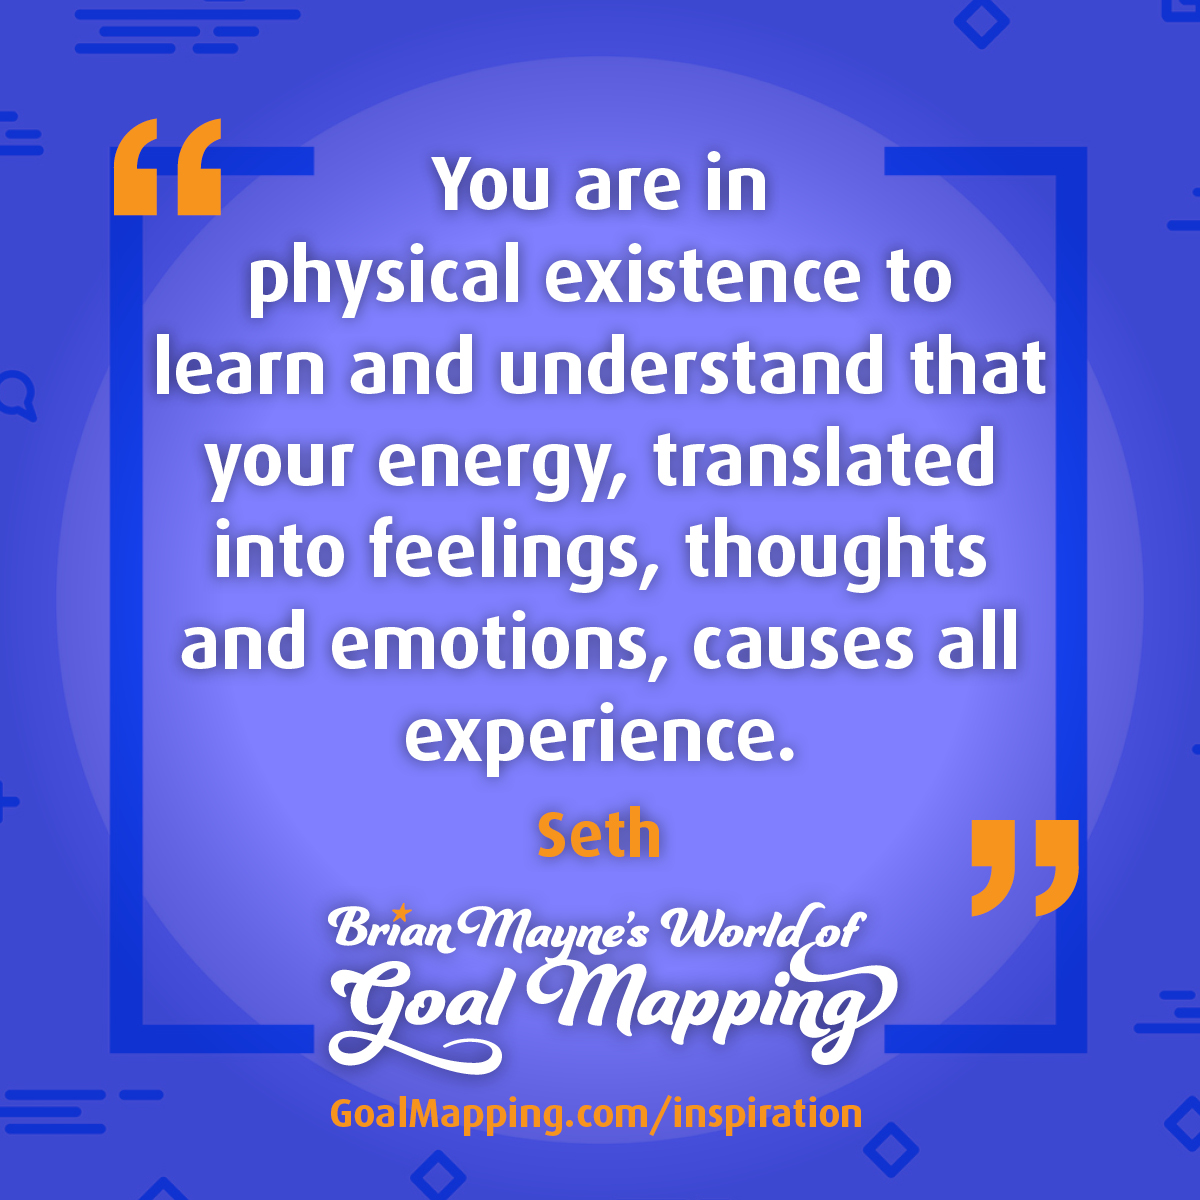 "You are in physical existence to learn and understand that your energy, translated into feelings, thoughts and emotions, causes all experience." Seth